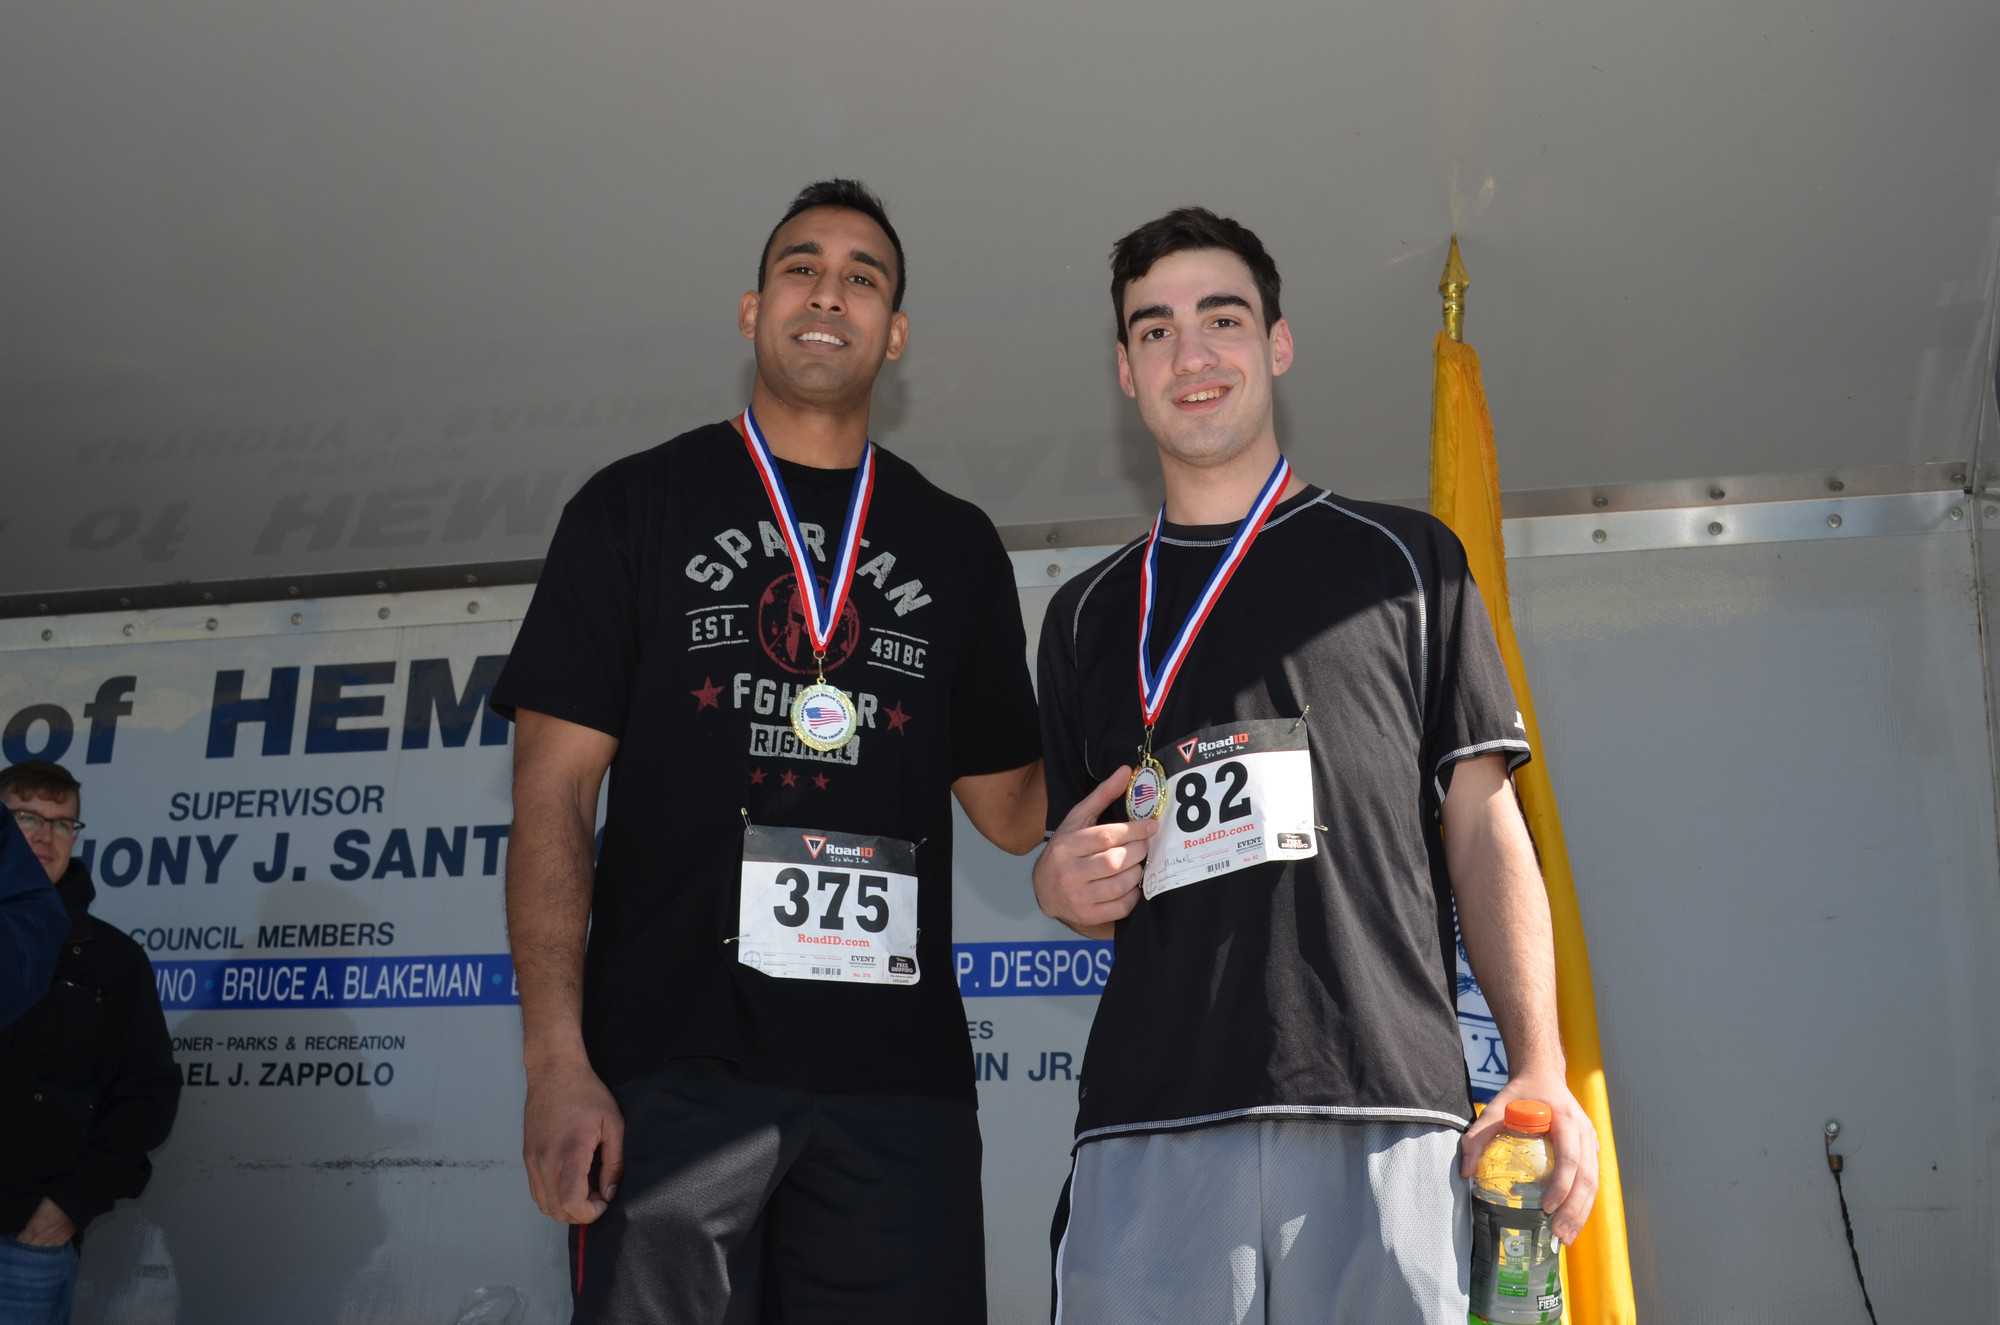 1st place ages 20-24 Sagar Beharry from Hempstead with 2nd place ages 20-24 Michael Borgia from East Rockaway